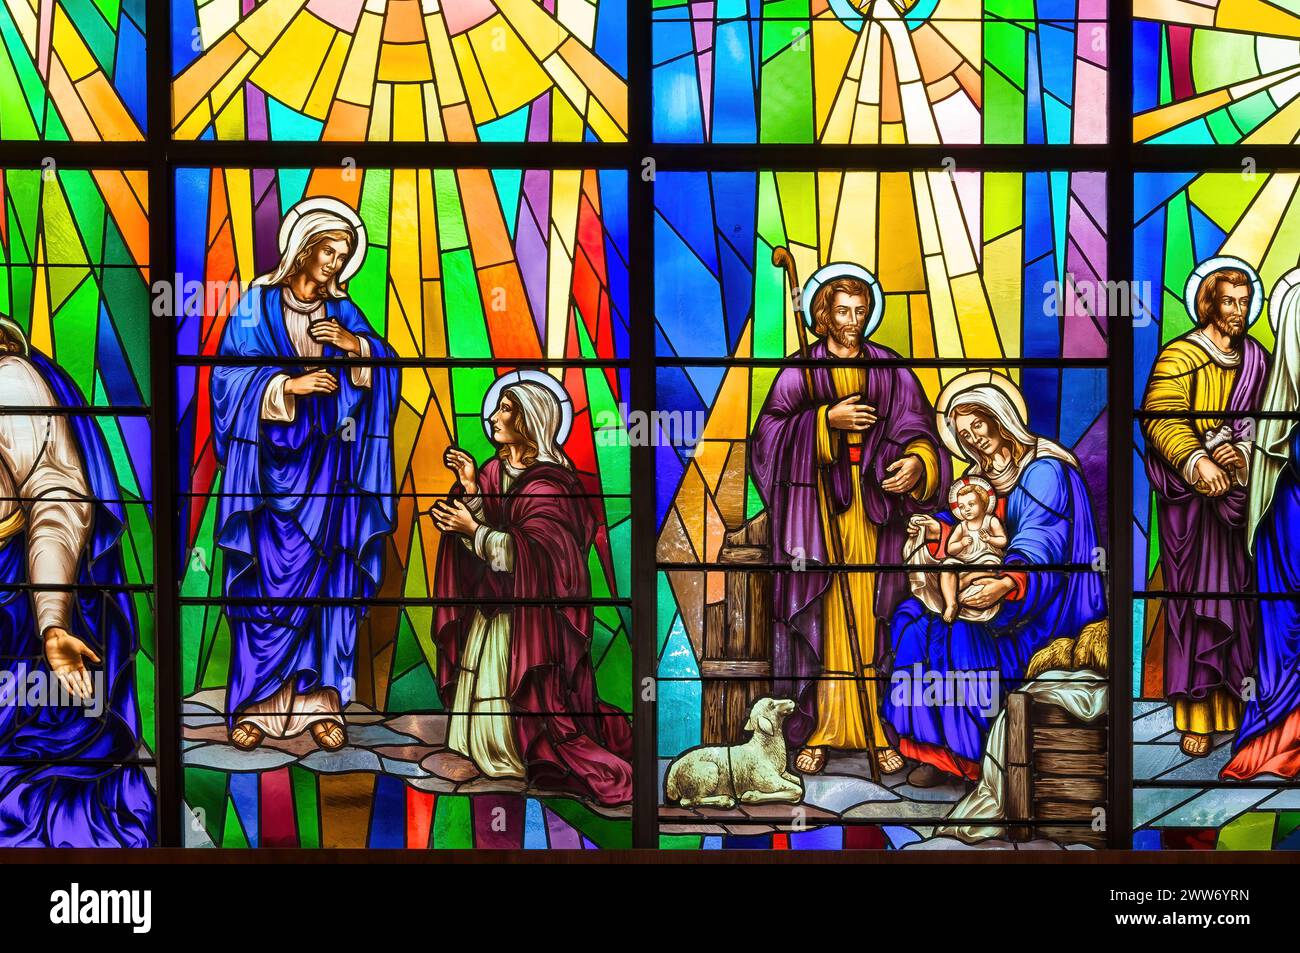 Nativity art stained glass window or mural, Announciation Catholic Church, Toronto, Canada Stock Photo